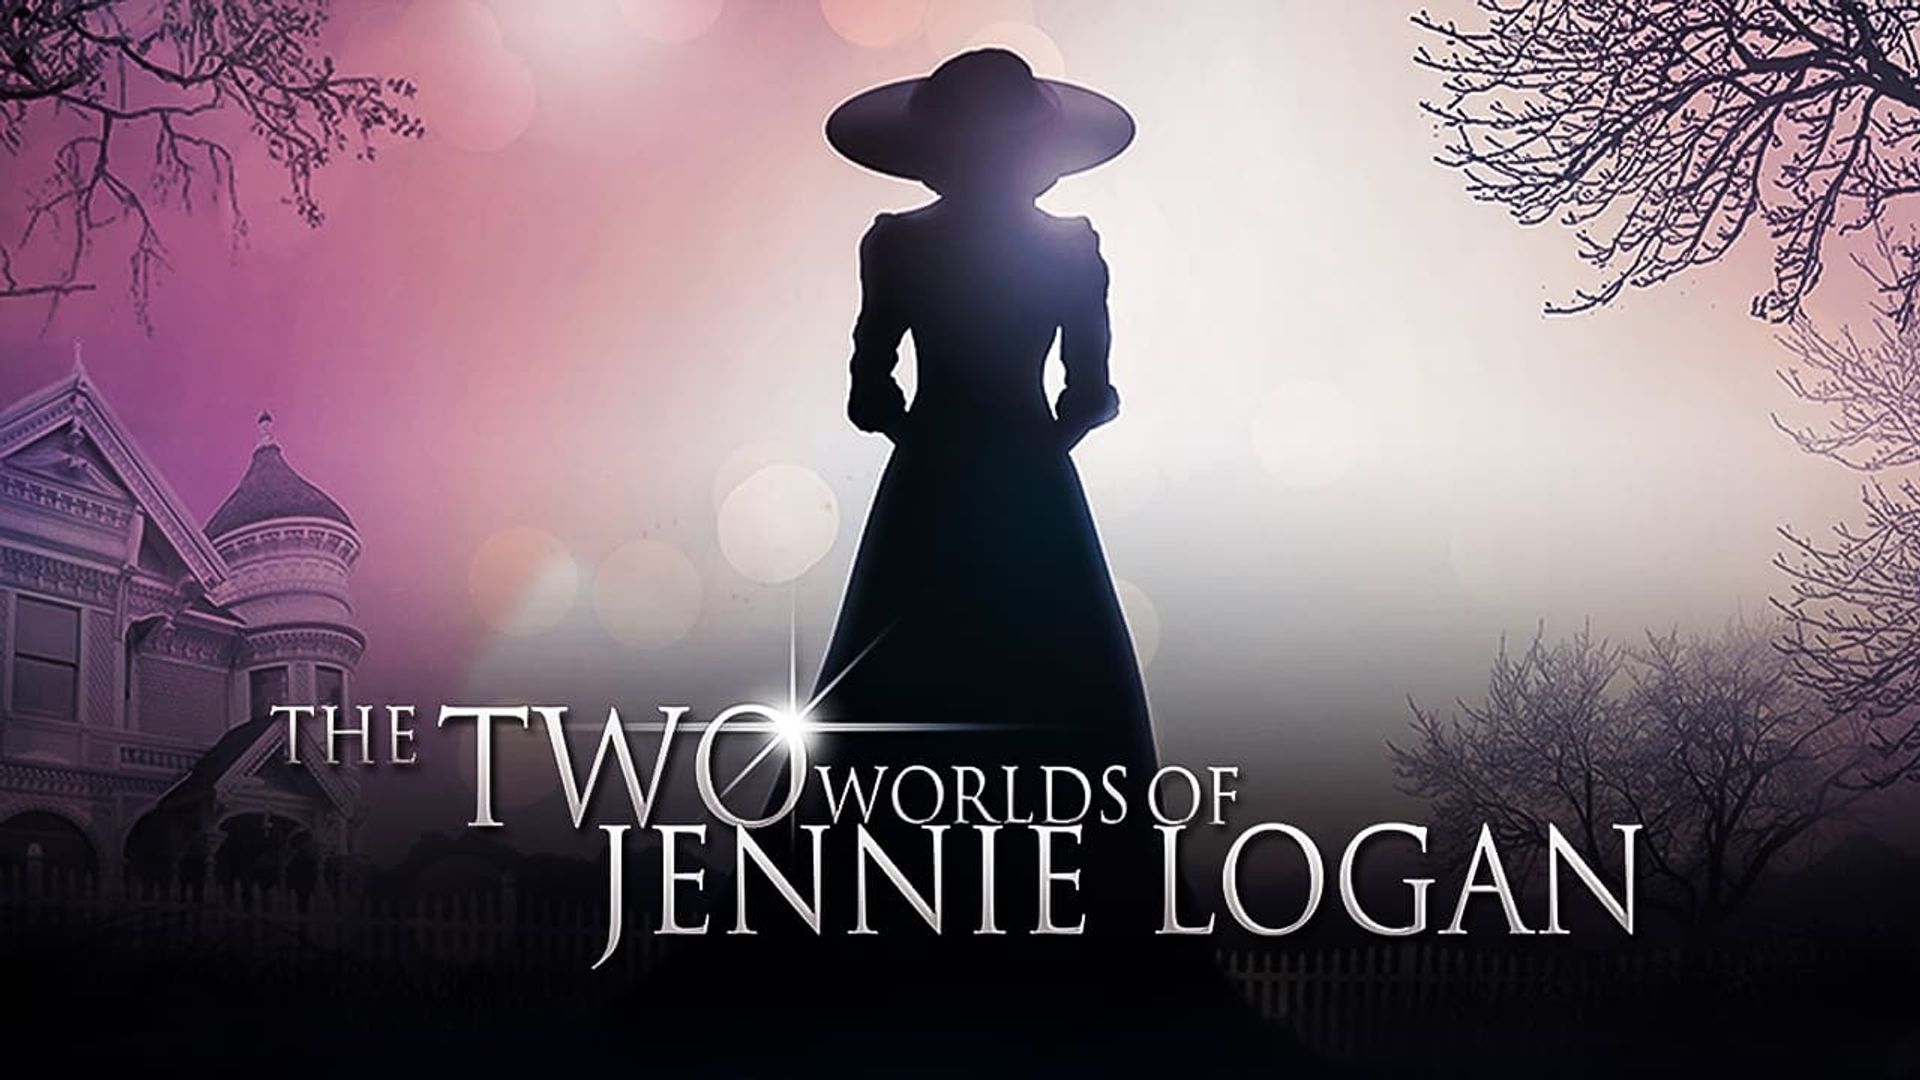 The Two Worlds of Jennie Logan background